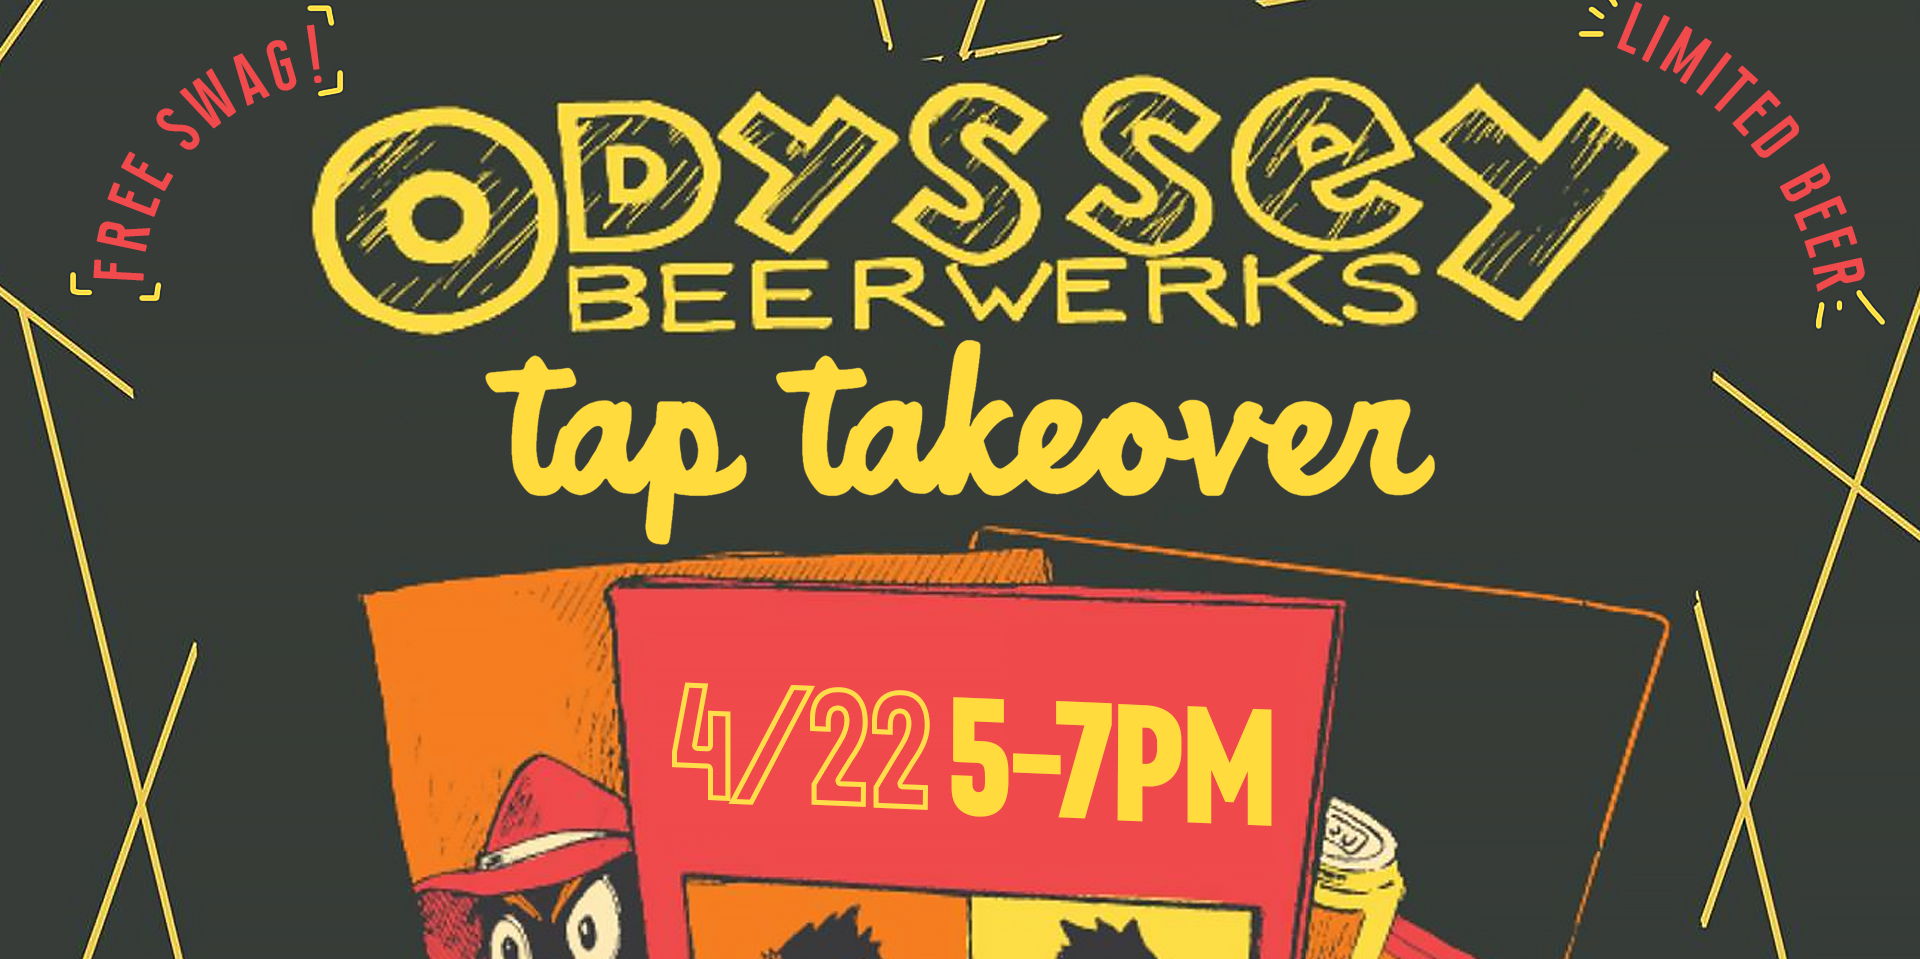 Odyssey Brewing Tap Takeover promotional image